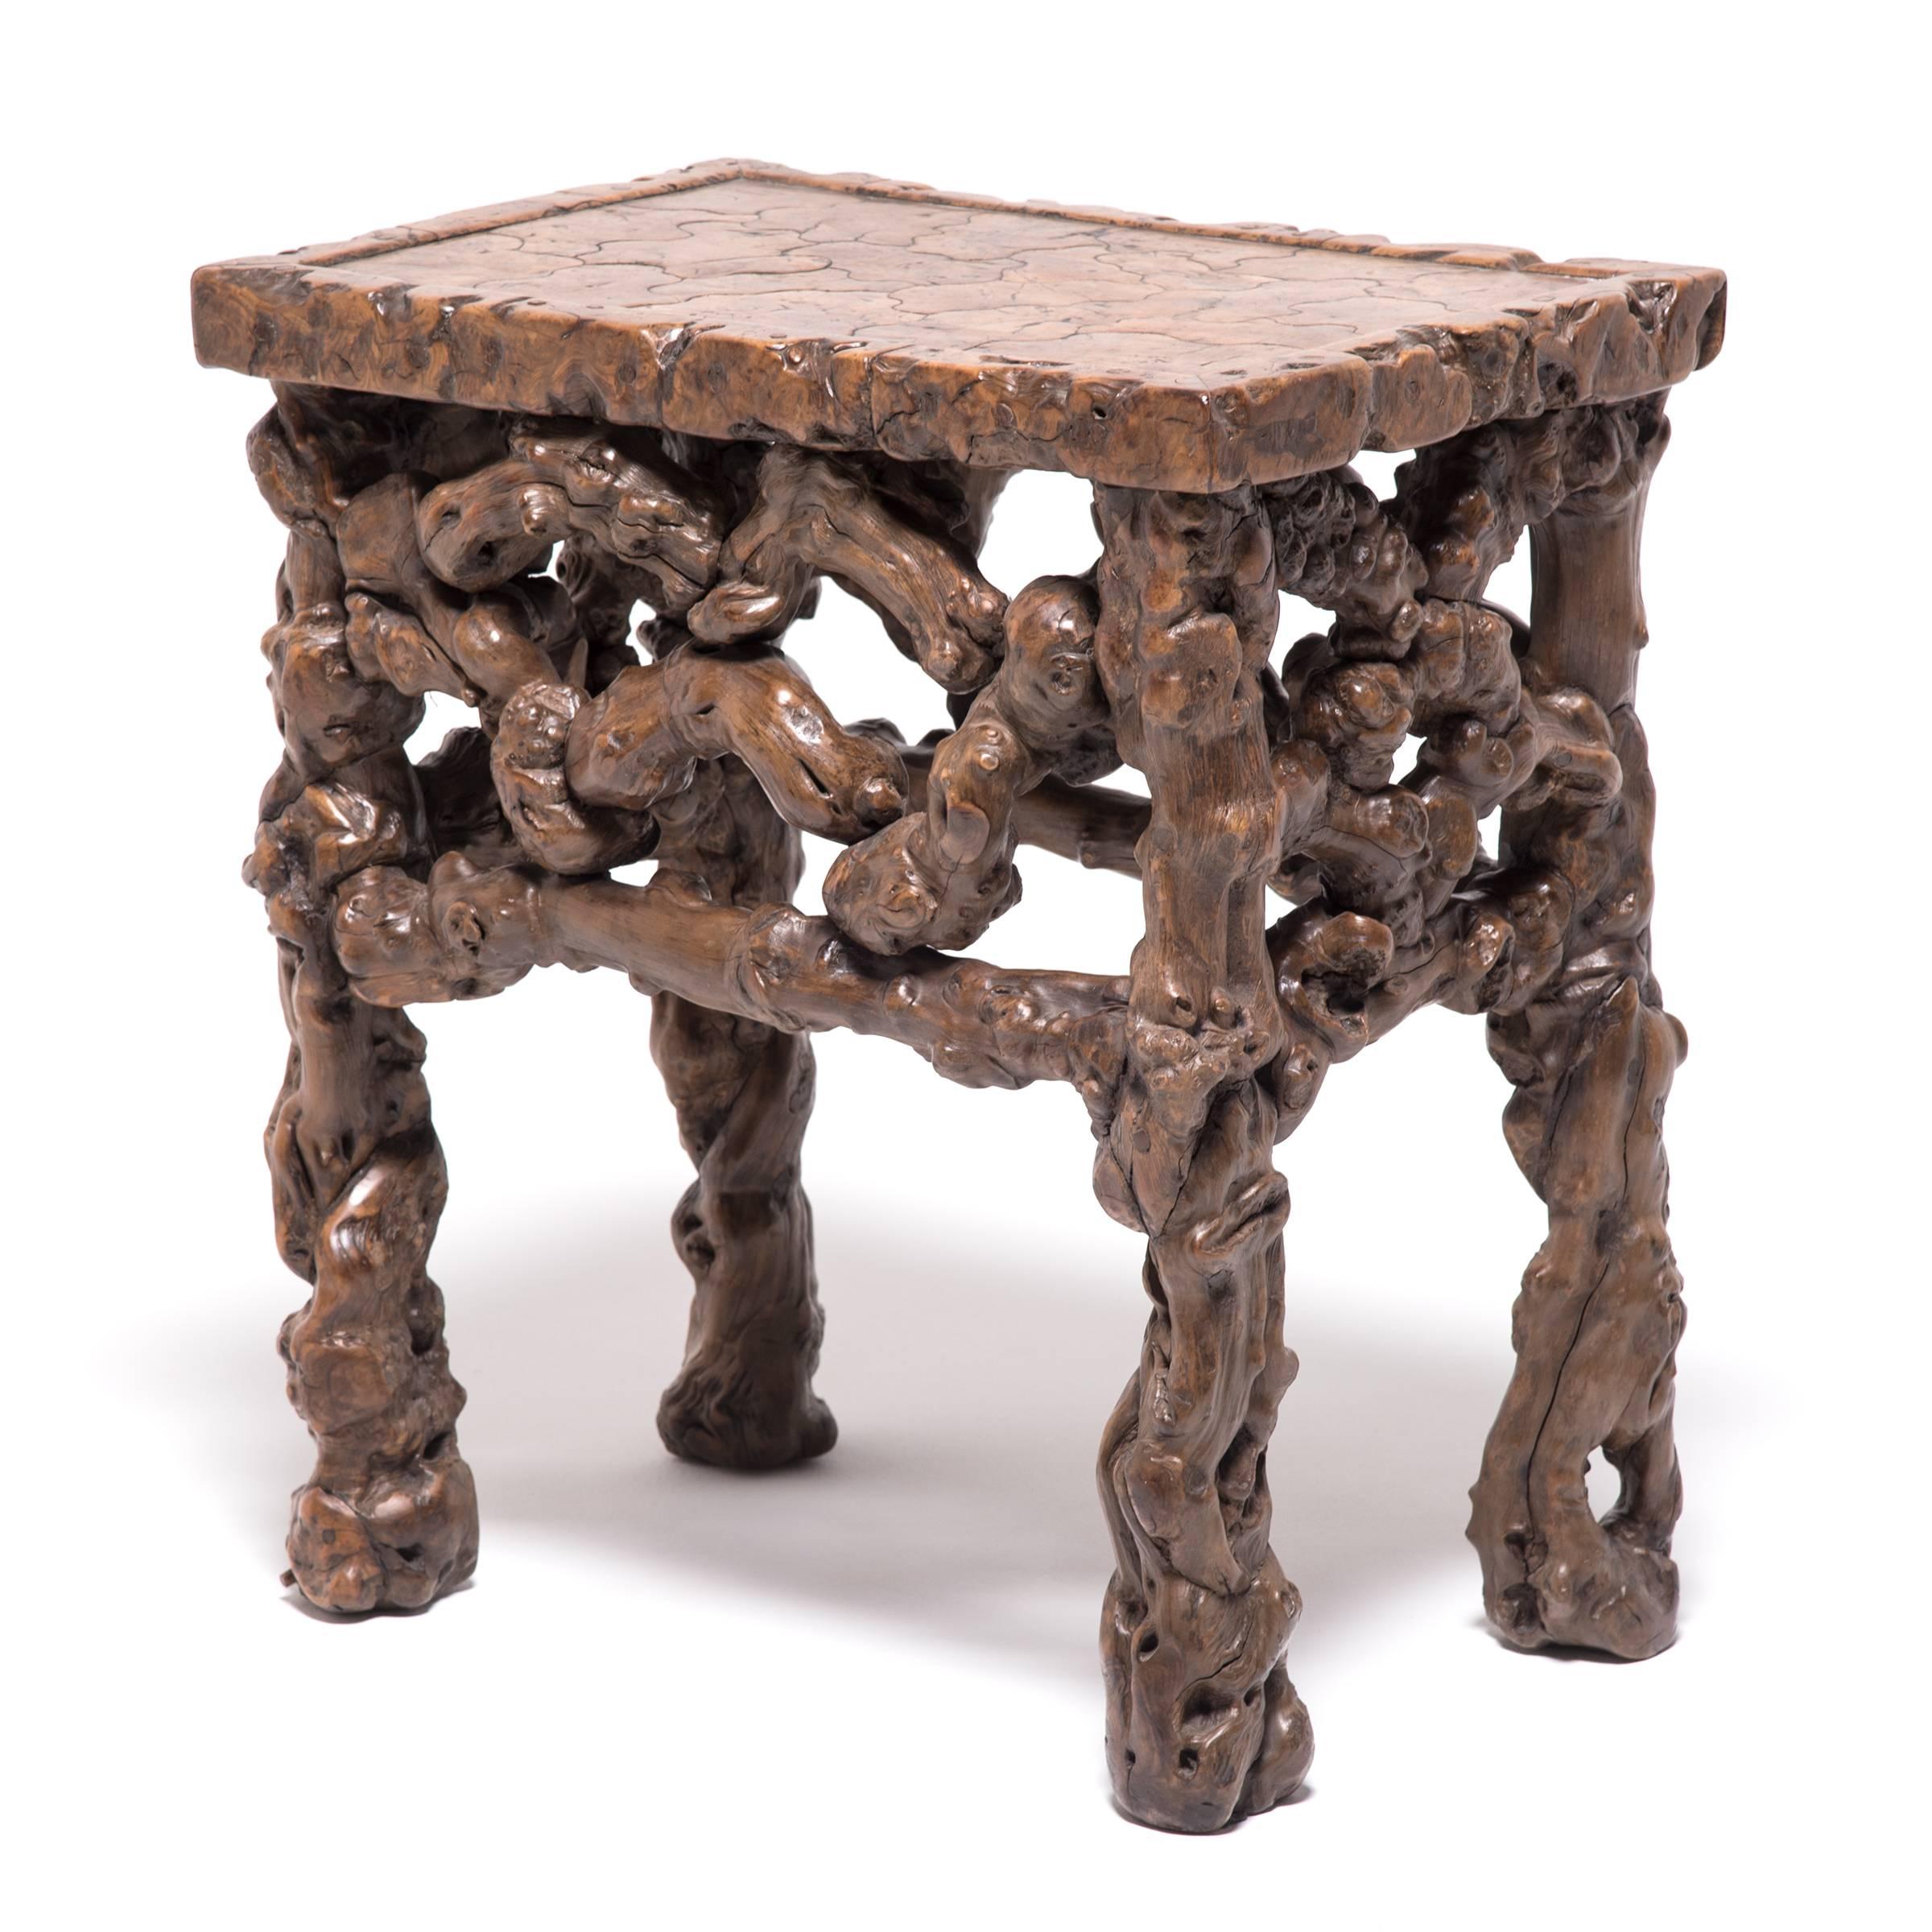 This rare, natural form root wood side table has a pierced ornate apron and marquetry-styled top that creates a beautiful, interlocking pattern. Naturally contorted wood has been appreciated in China for millennia. The organic forms appealed to